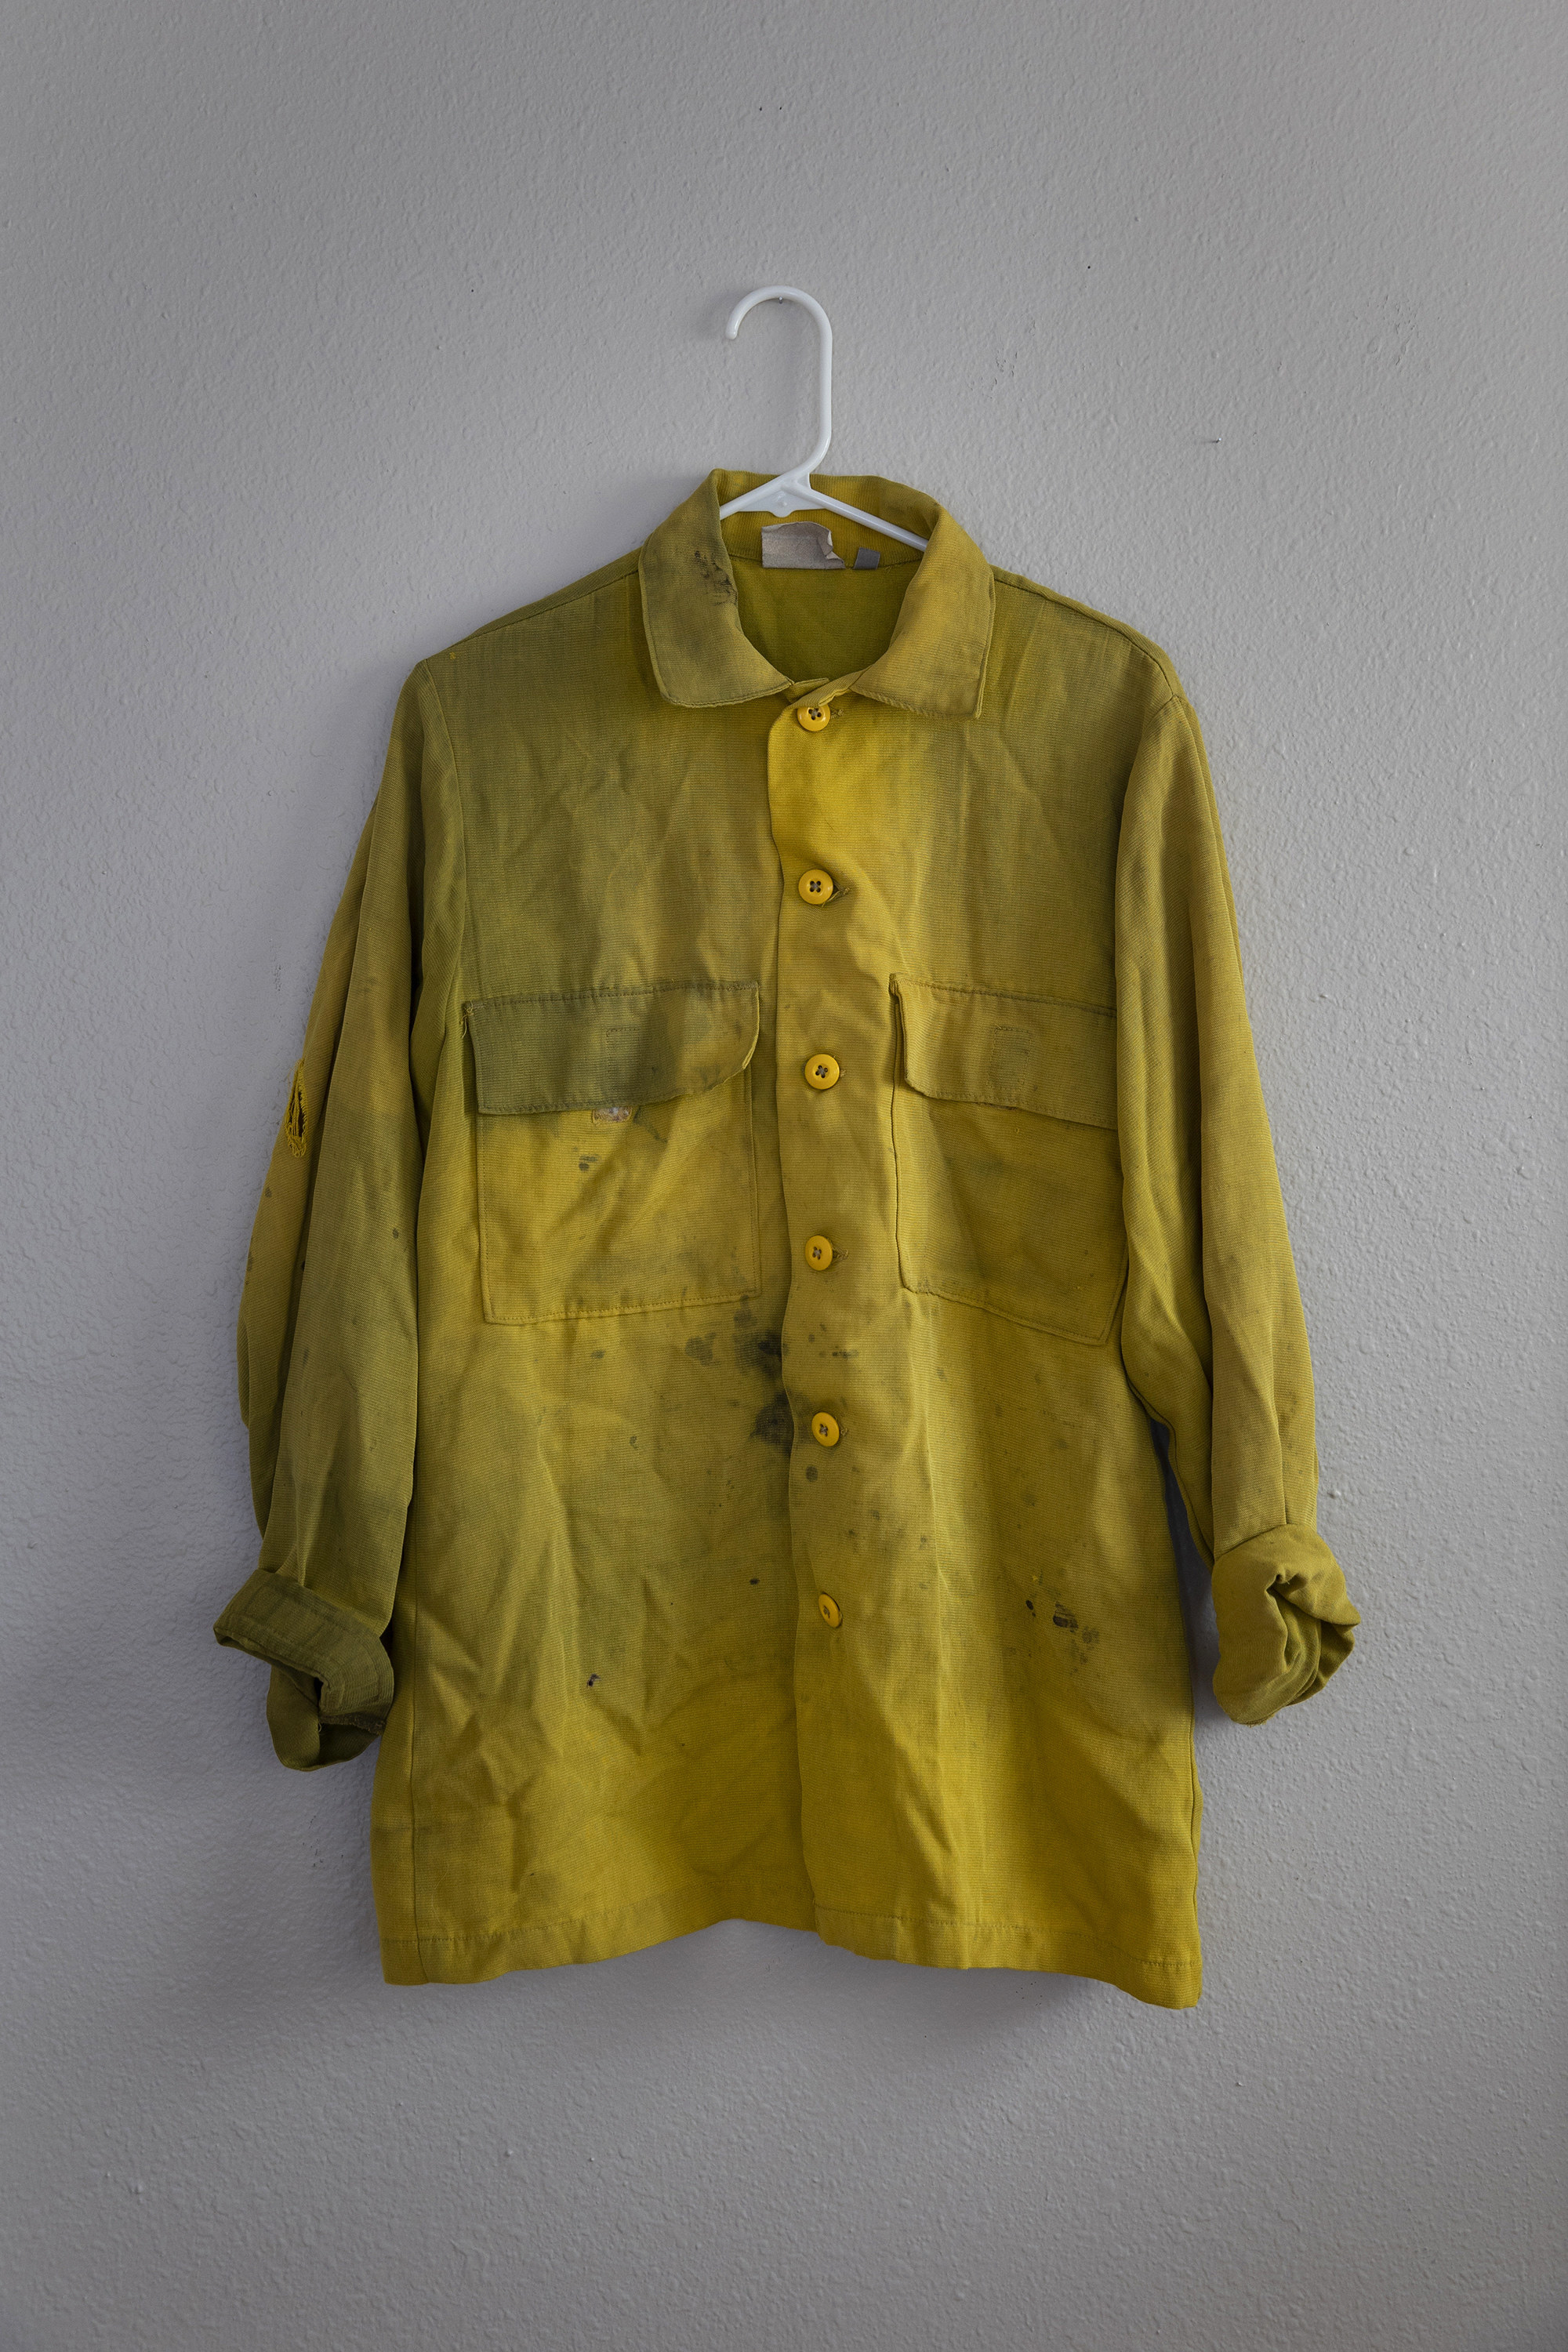 A yellow shirt photographed on a white wall